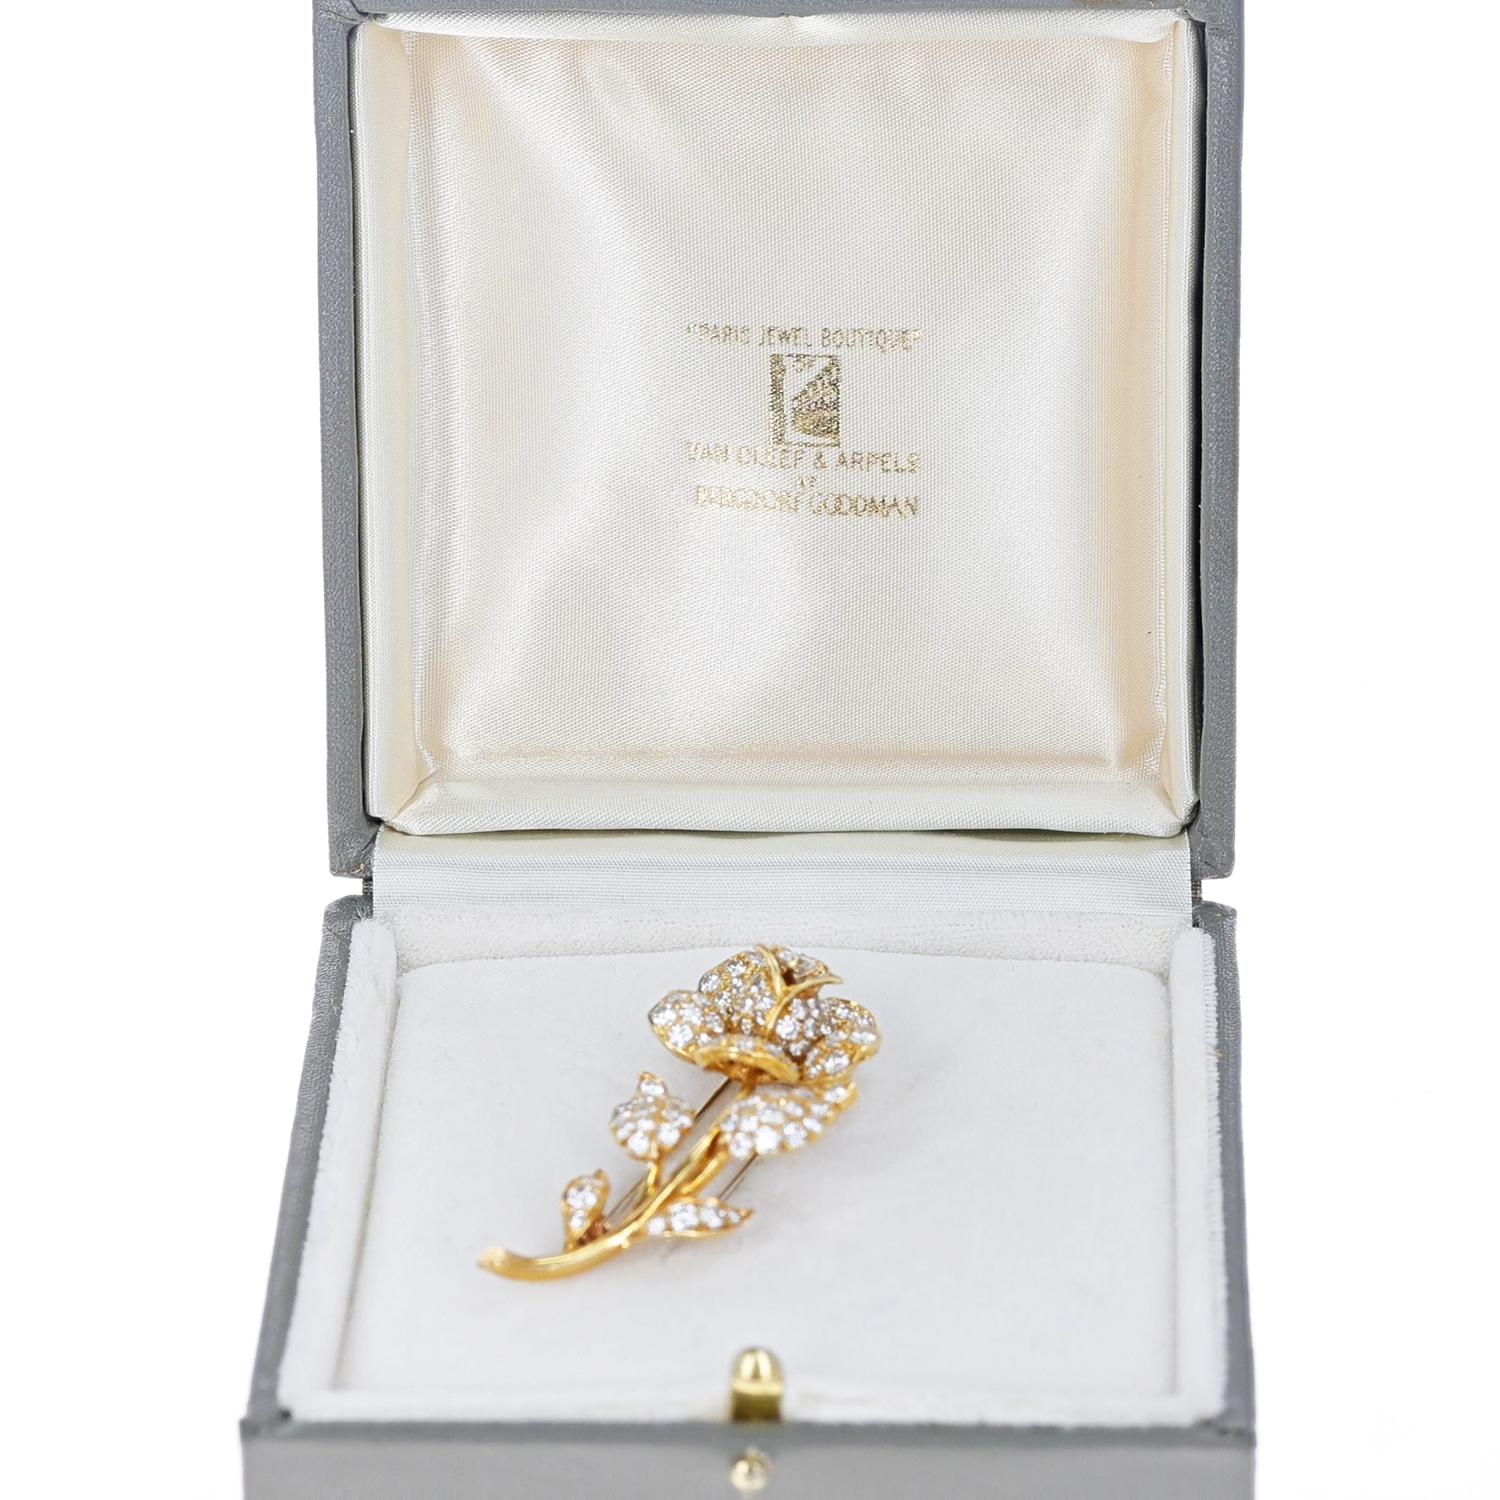 Van Cleef & Arpels Diamond Rose Brooch Pin, 18k In Excellent Condition For Sale In New York, NY